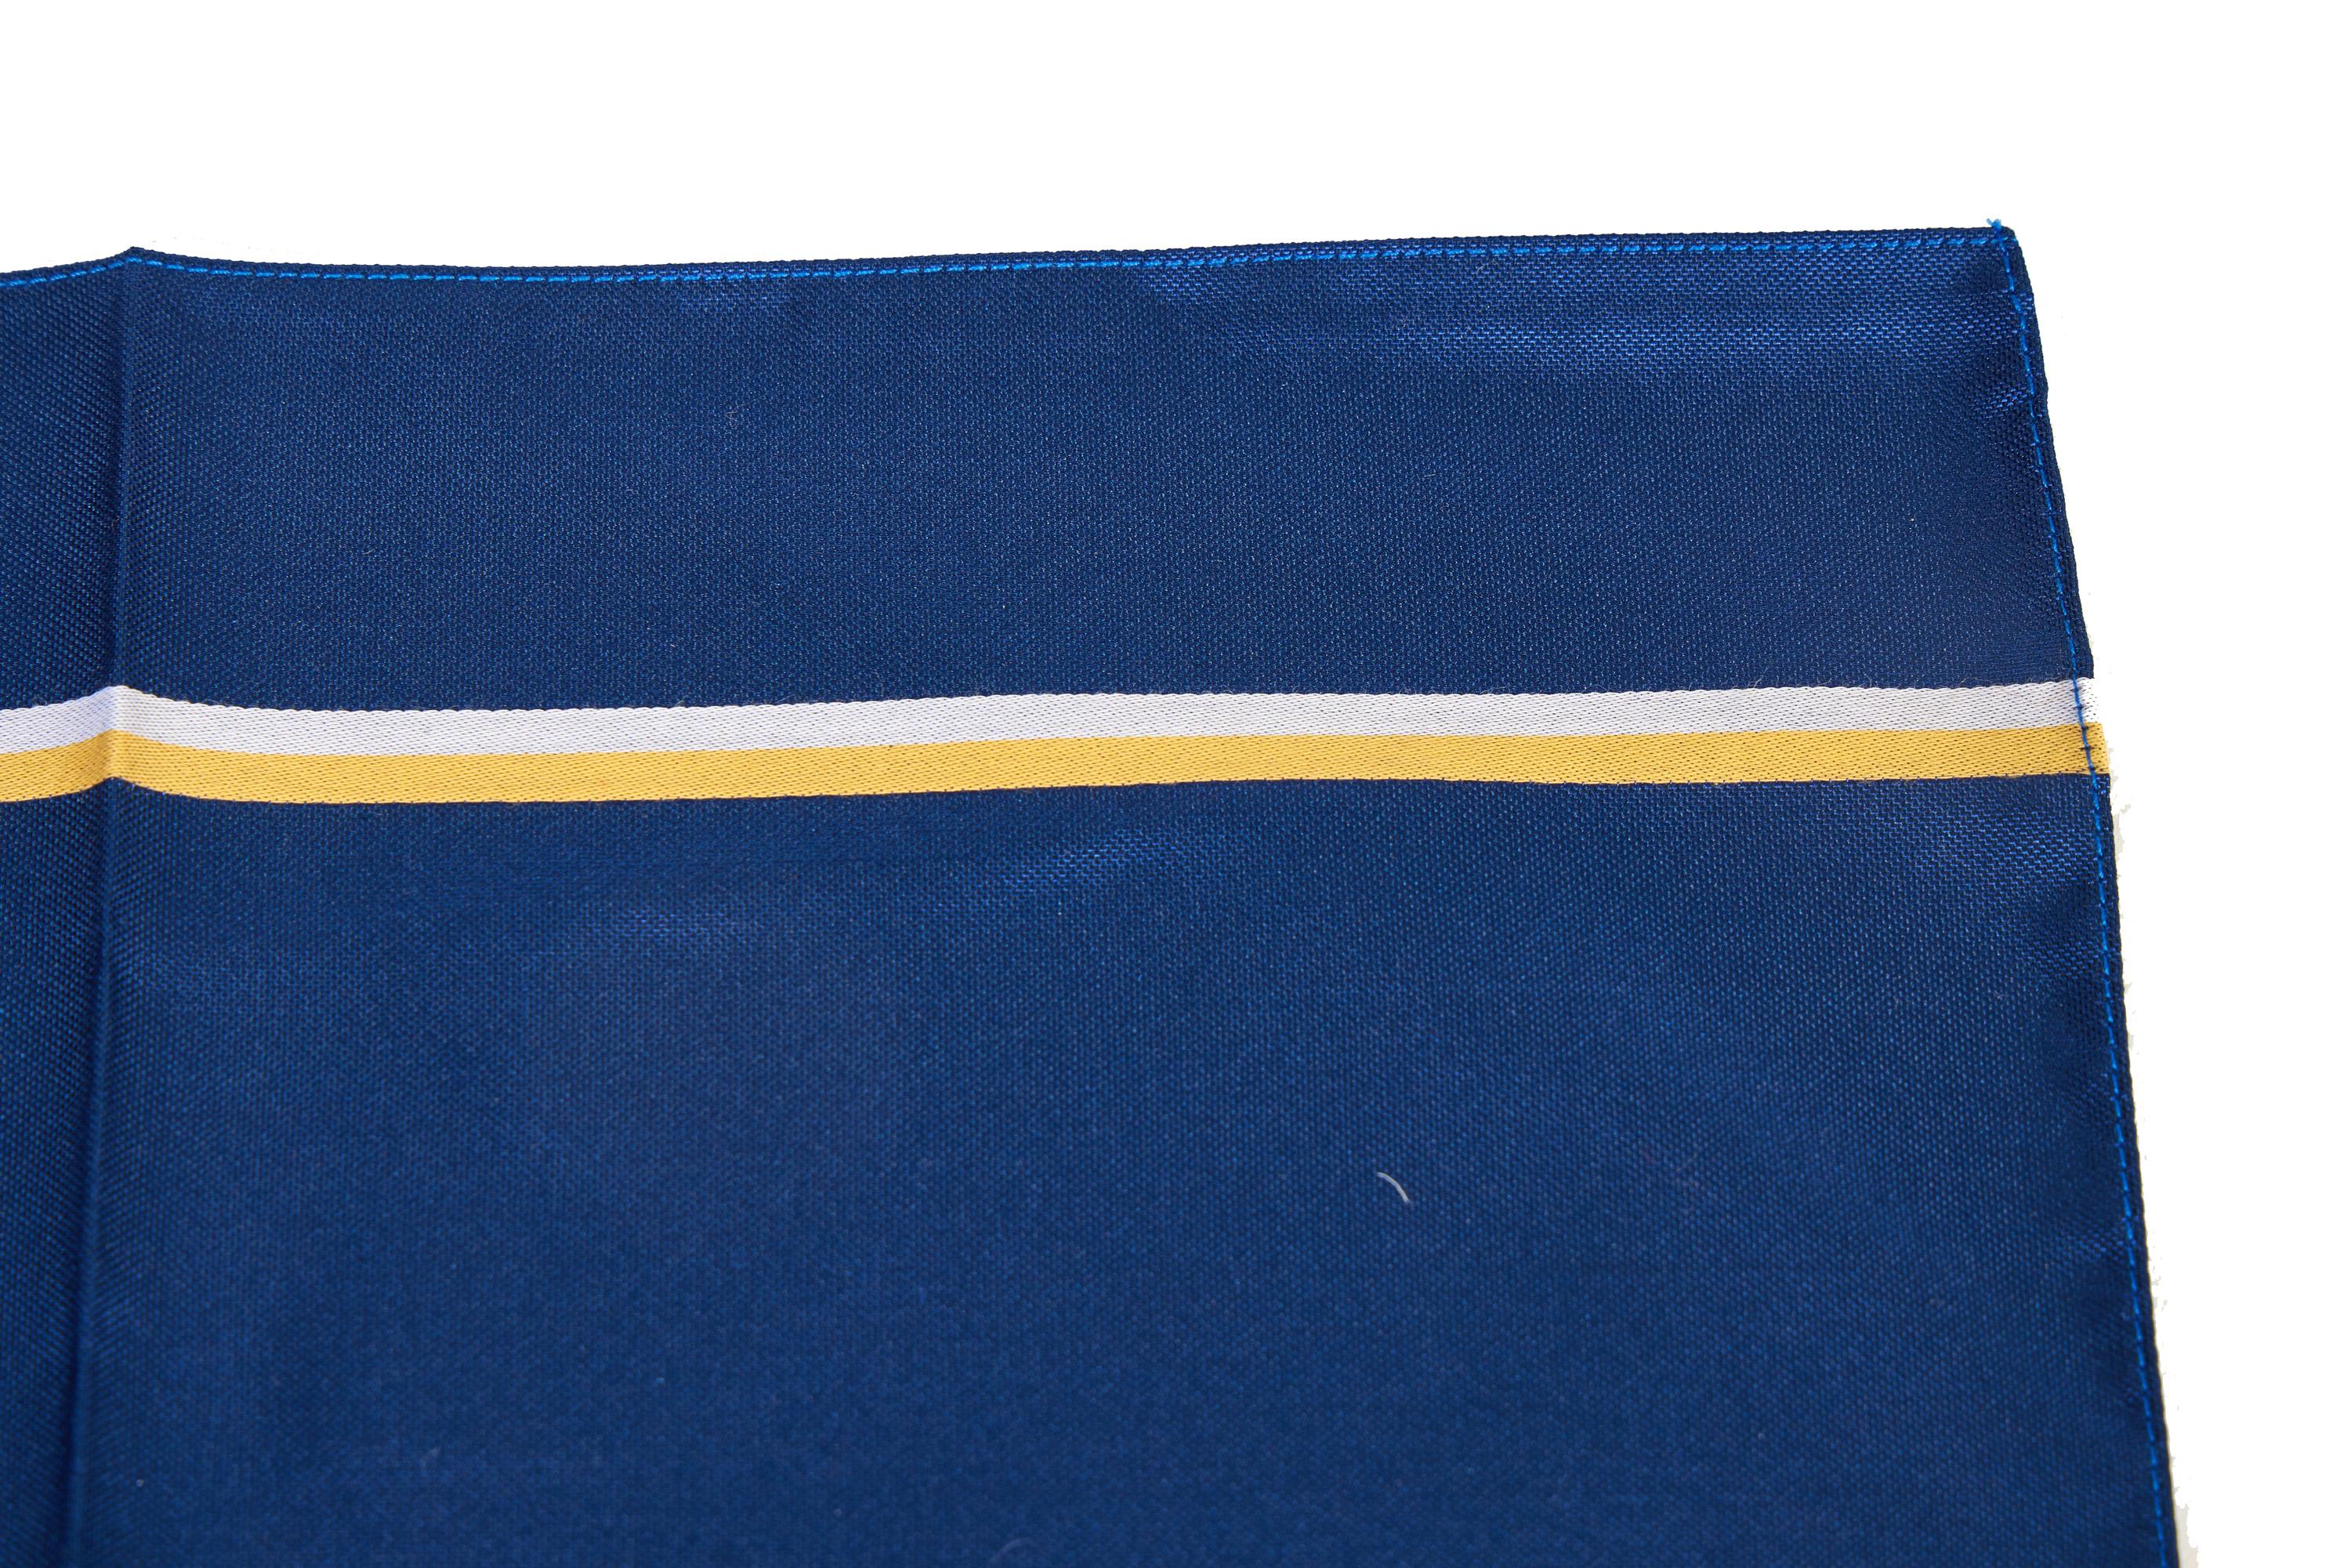 Louis Vuitton brand new cotton pocket square in blue with yellow and white stripe . Hand rolled edges.